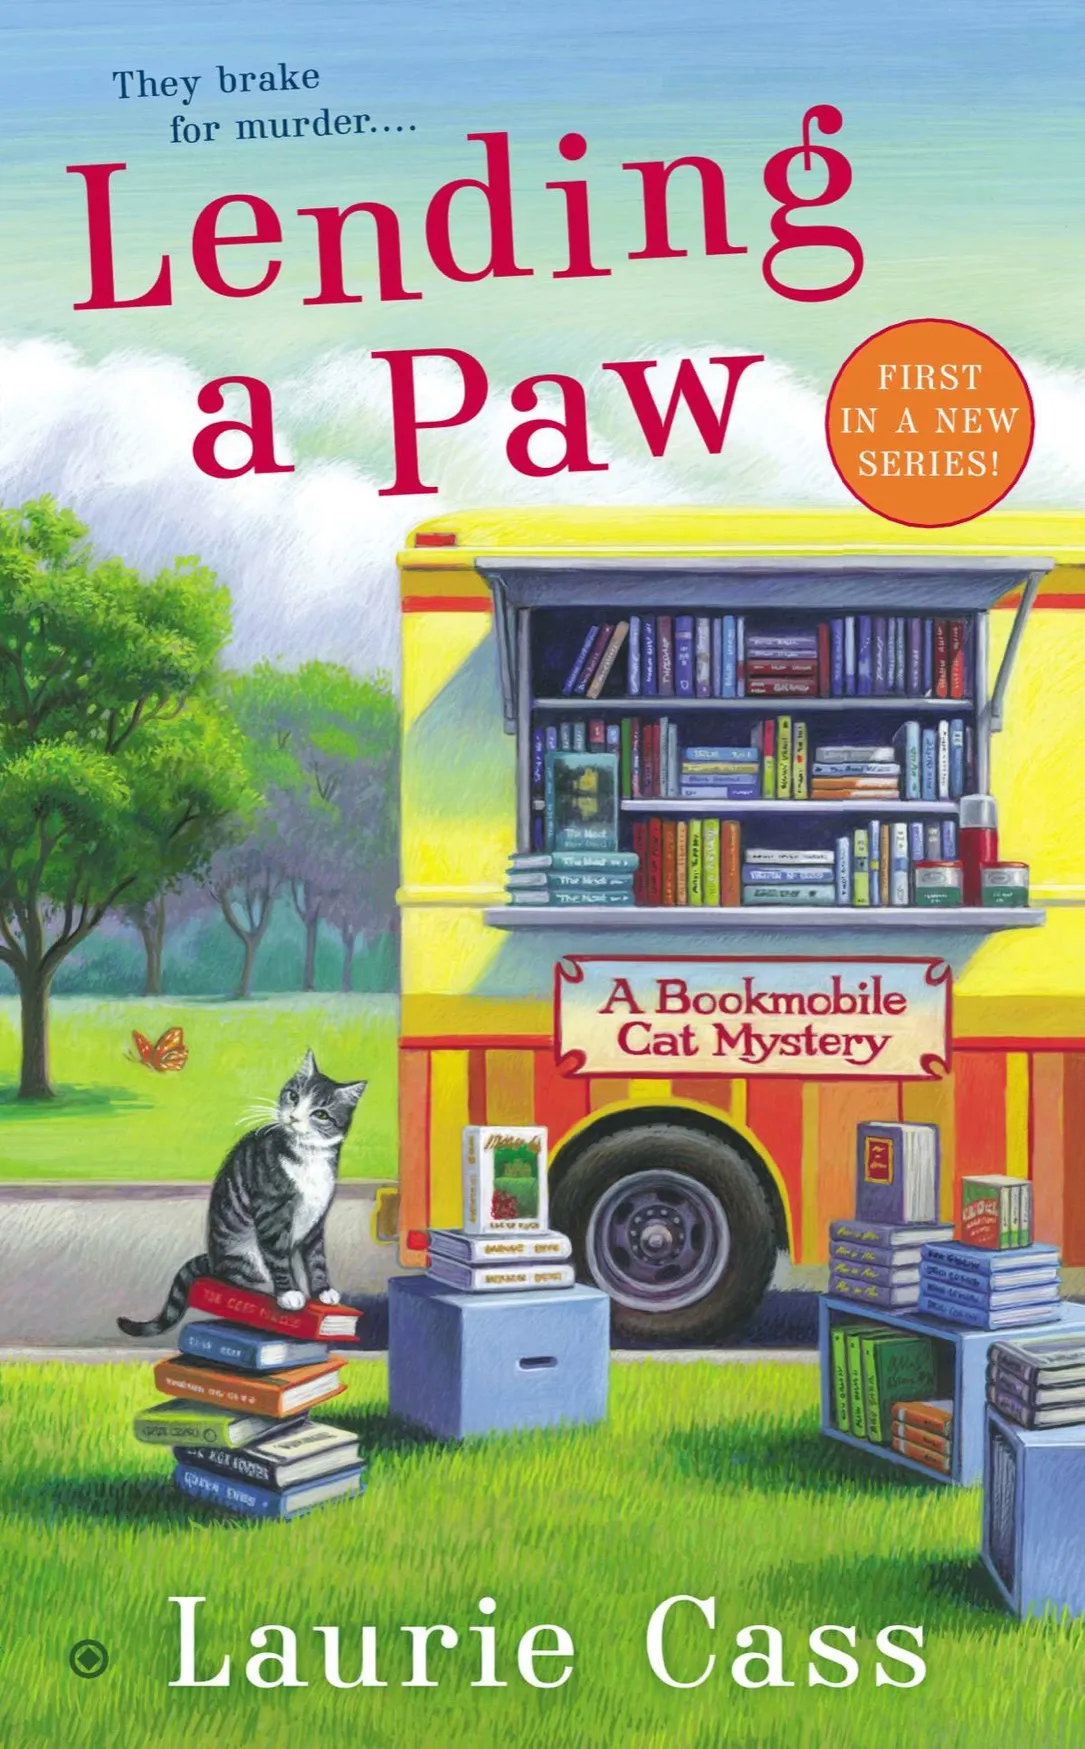 Lending a Paw (A Bookmobile Cat Mystery #1)